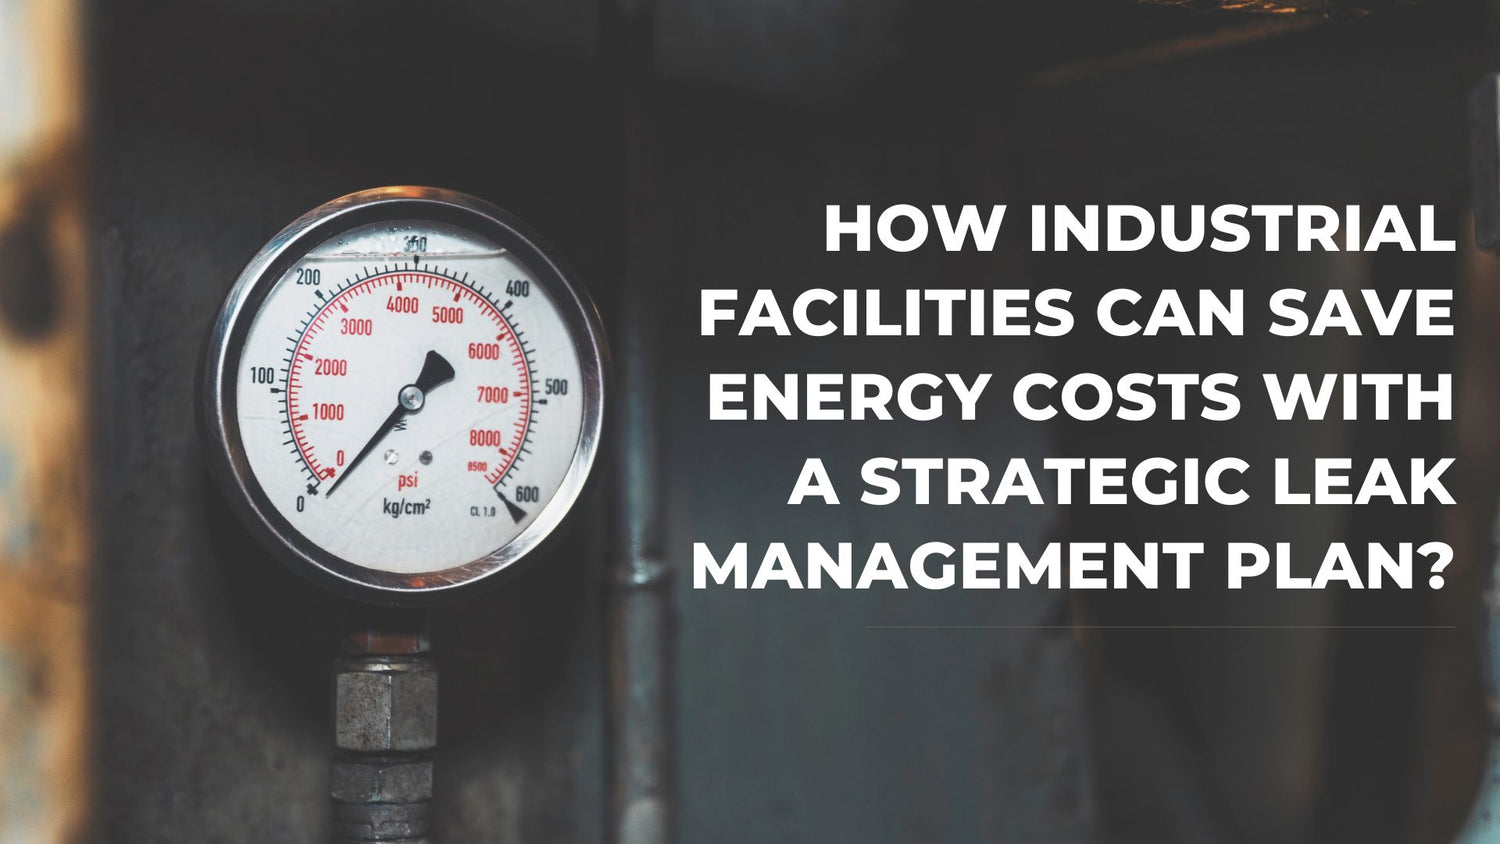 How Industrial Facilities can save on Energy Costs with a Strategic Leak Management Plan?